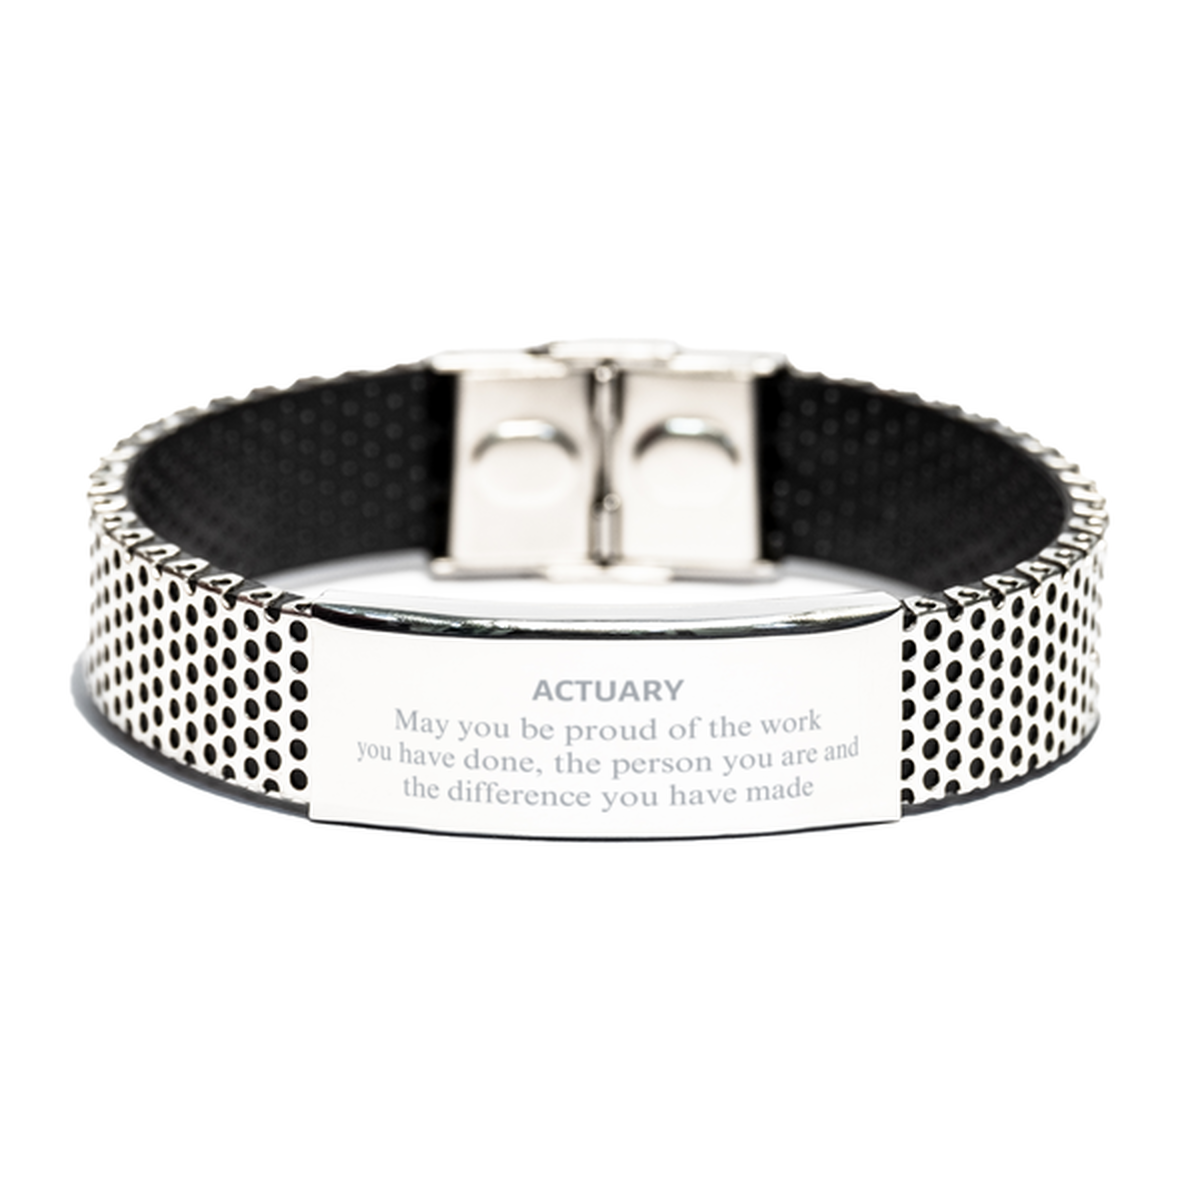 Actuary May you be proud of the work you have done, Retirement Actuary Stainless Steel Bracelet for Colleague Appreciation Gifts Amazing for Actuary